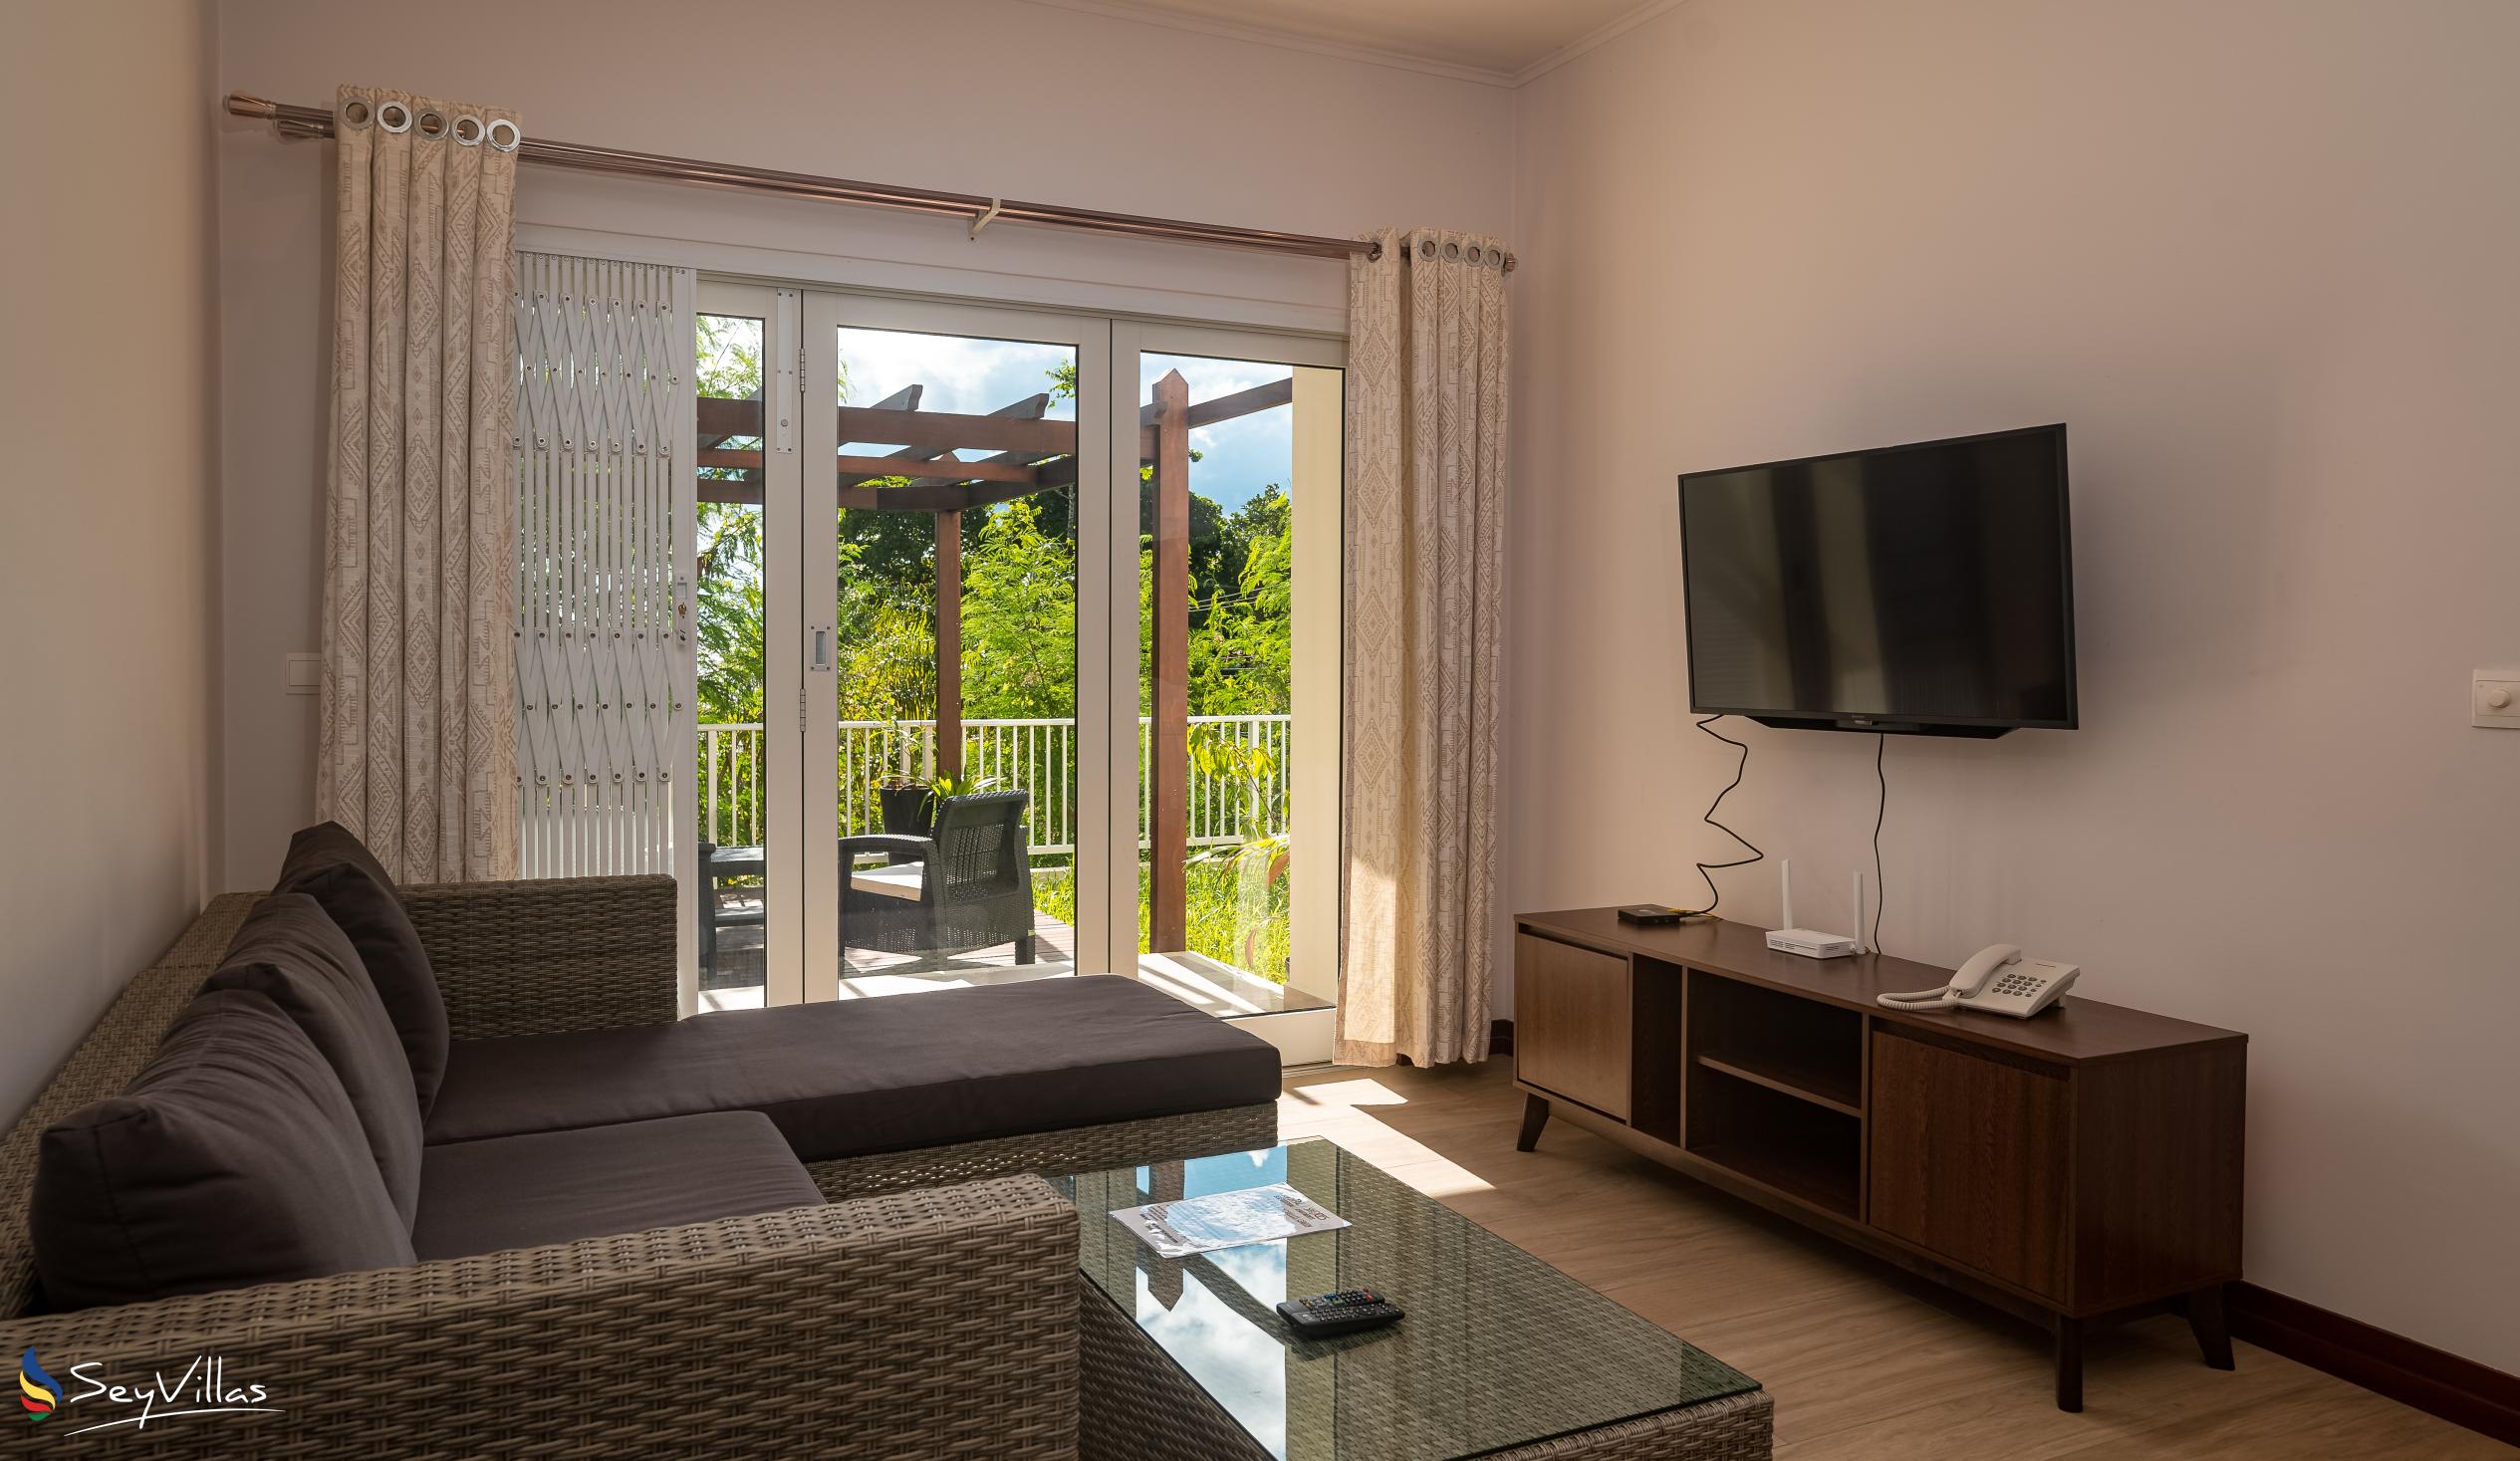 Photo 55: Crystal Shores Self Catering Apartments - Garden View Apartment - Mahé (Seychelles)